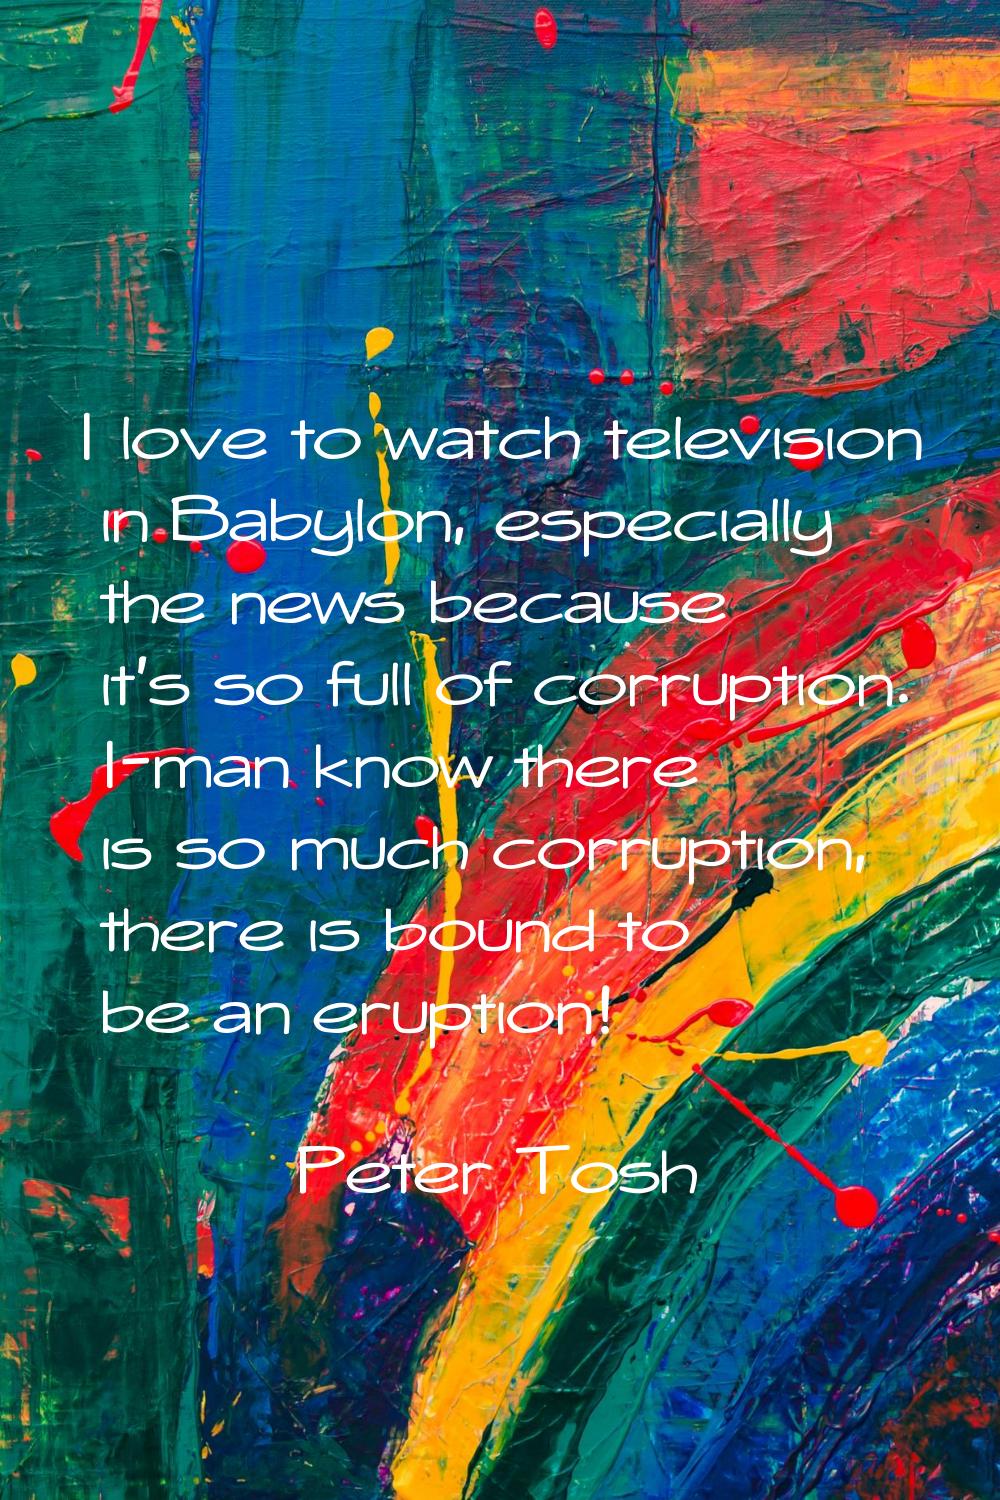 I love to watch television in Babylon, especially the news because it's so full of corruption. I-ma